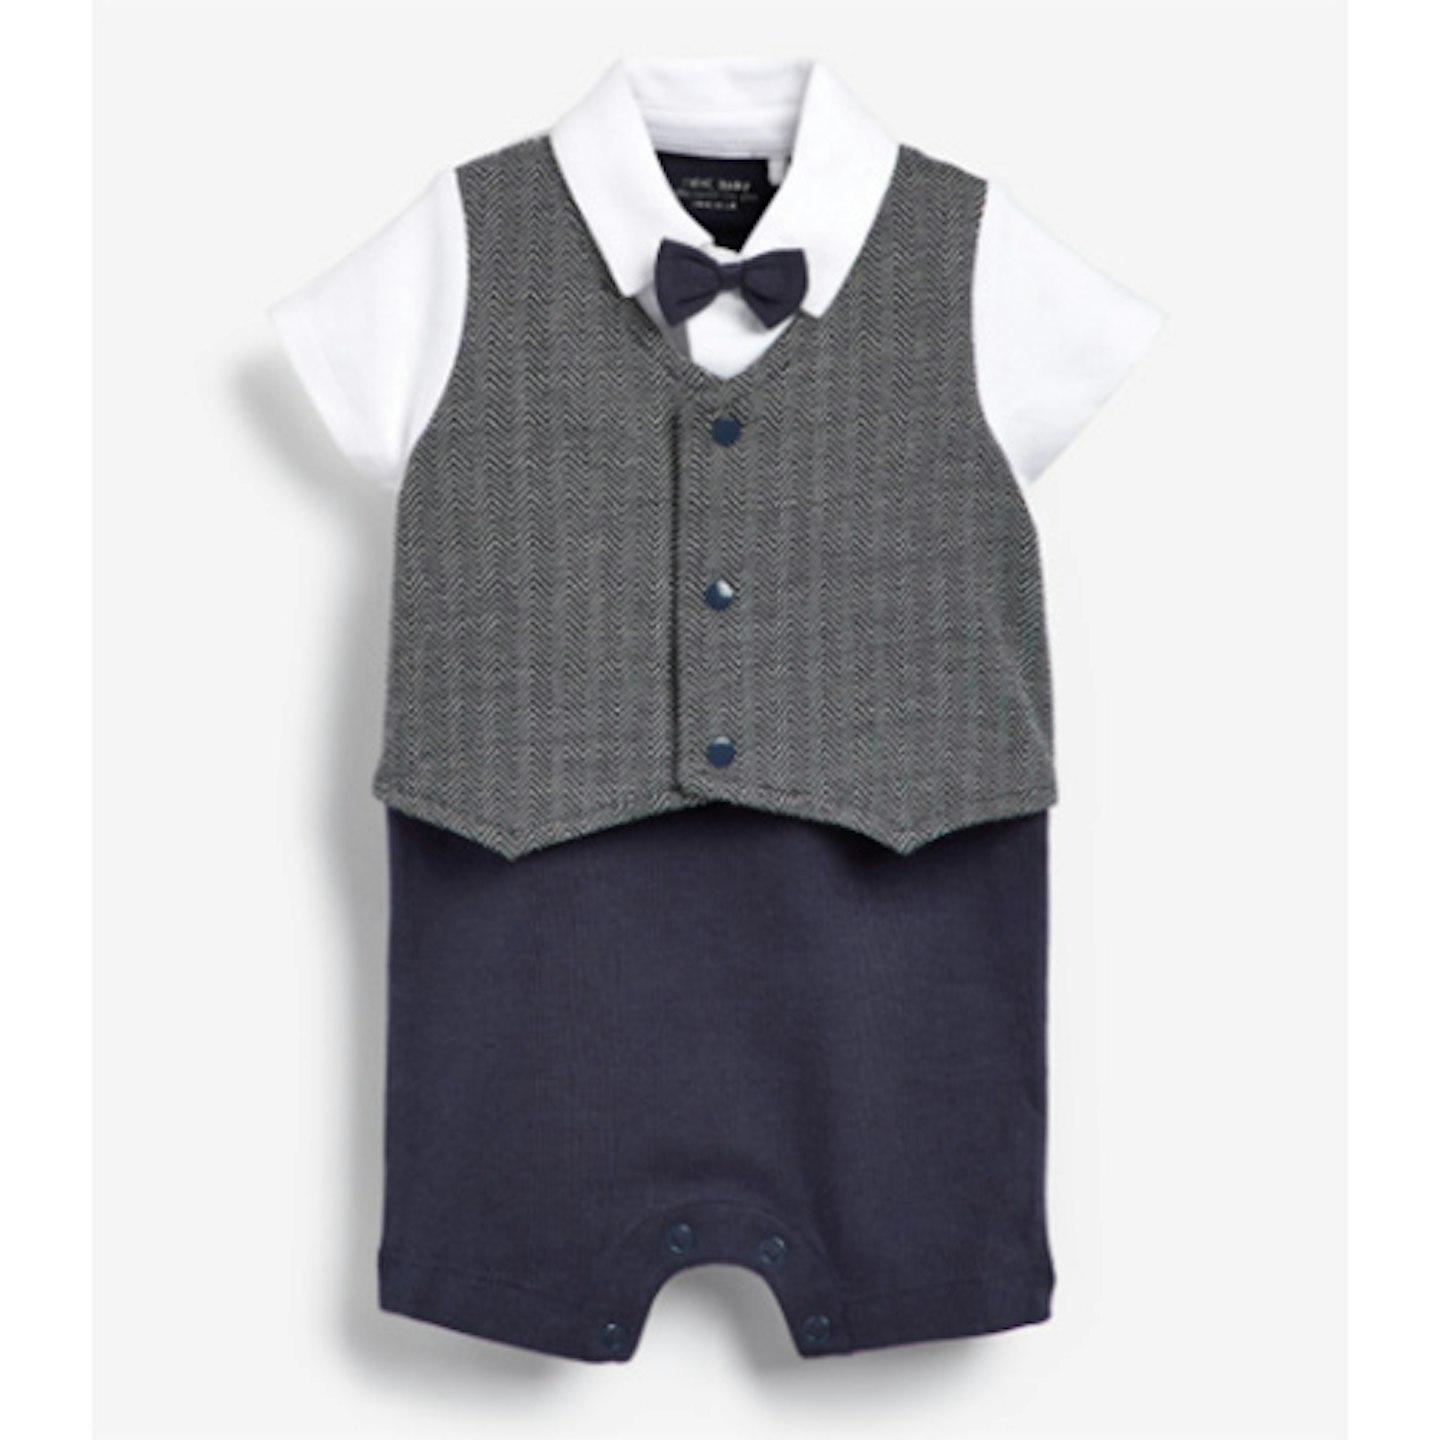 Smart Bow Tie and Waistcoat Rompersuit